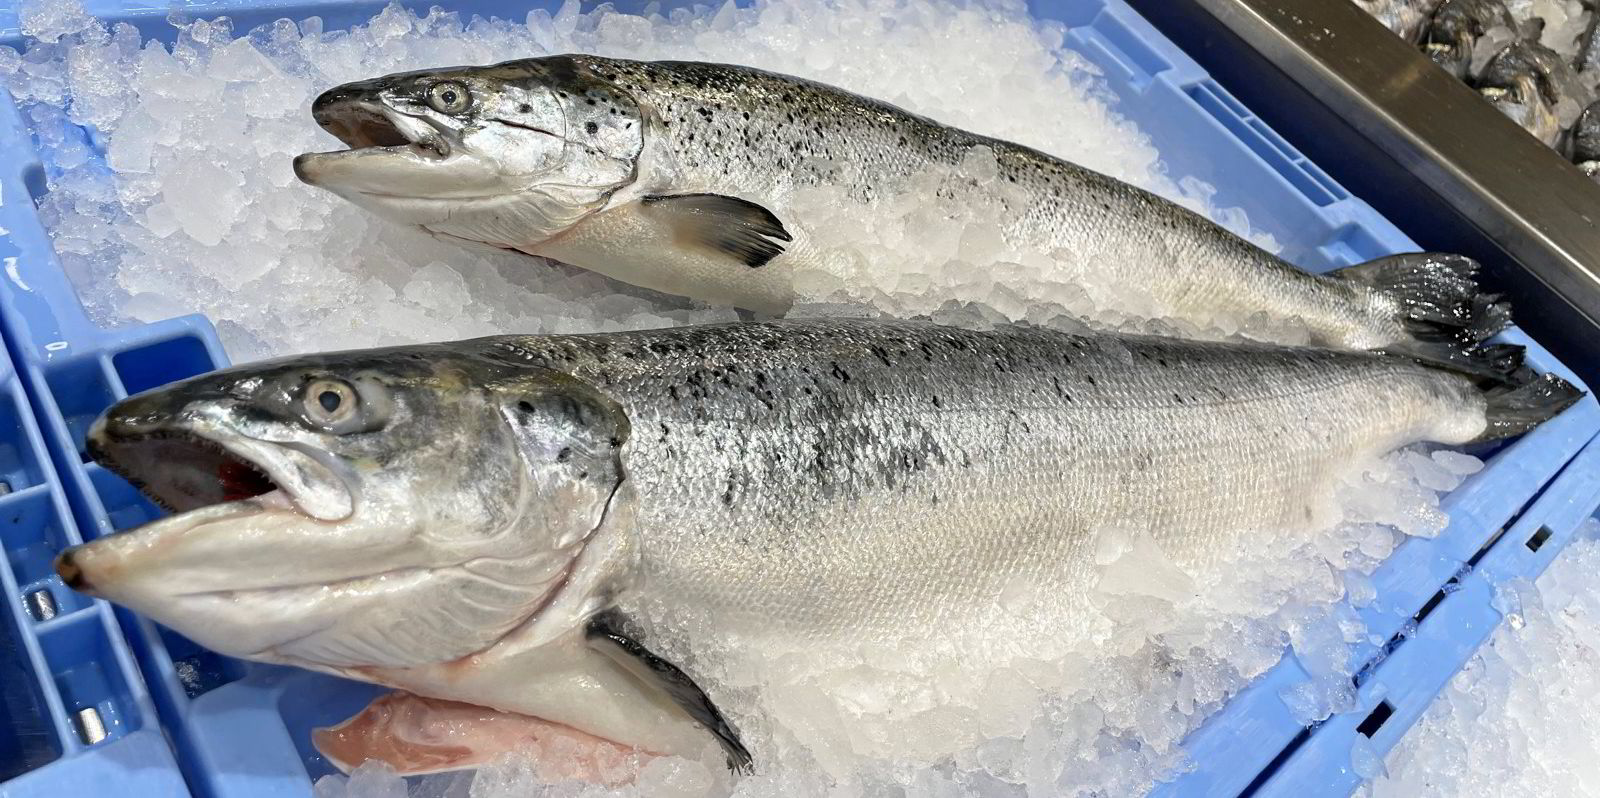 It's gotten ugly': Norway salmon prices down trending downward